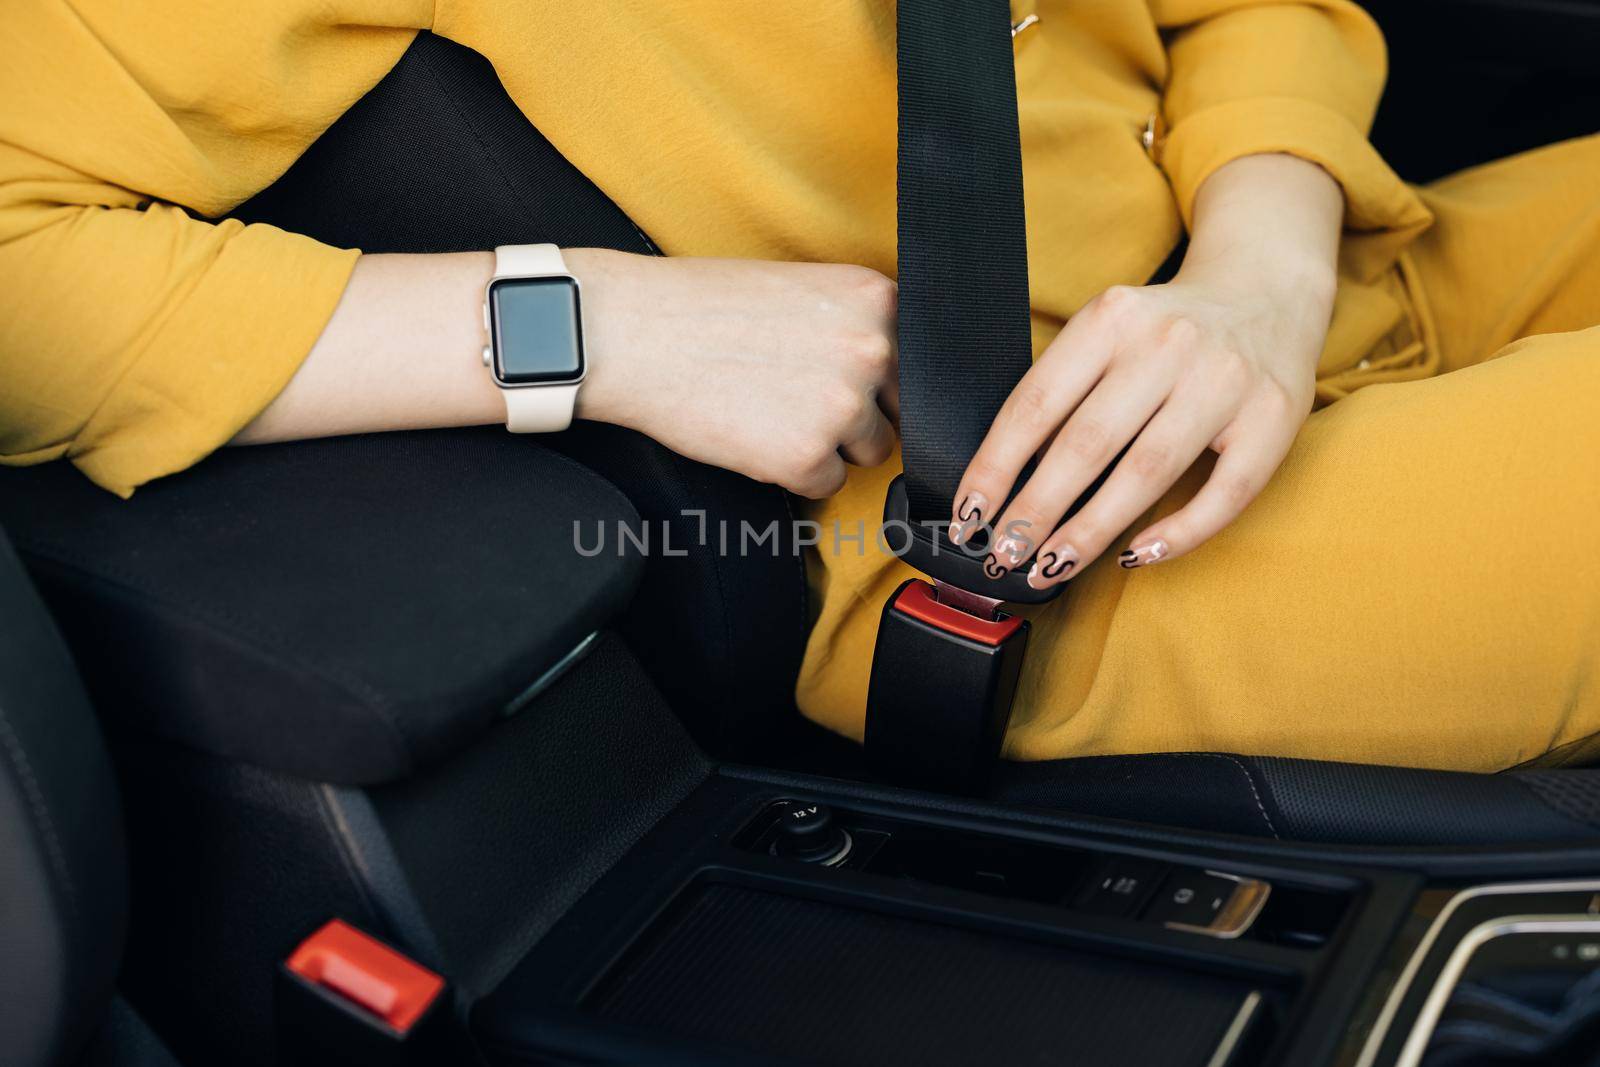 Buckle up seat belt in a car. Woman Hand Fastening Car Safety Seat Belt. Protection Road Safety Snap. Driver Fastening Seatbelt In Car. Woman Car Lap Buckling Inside Vehicle Before Driving.